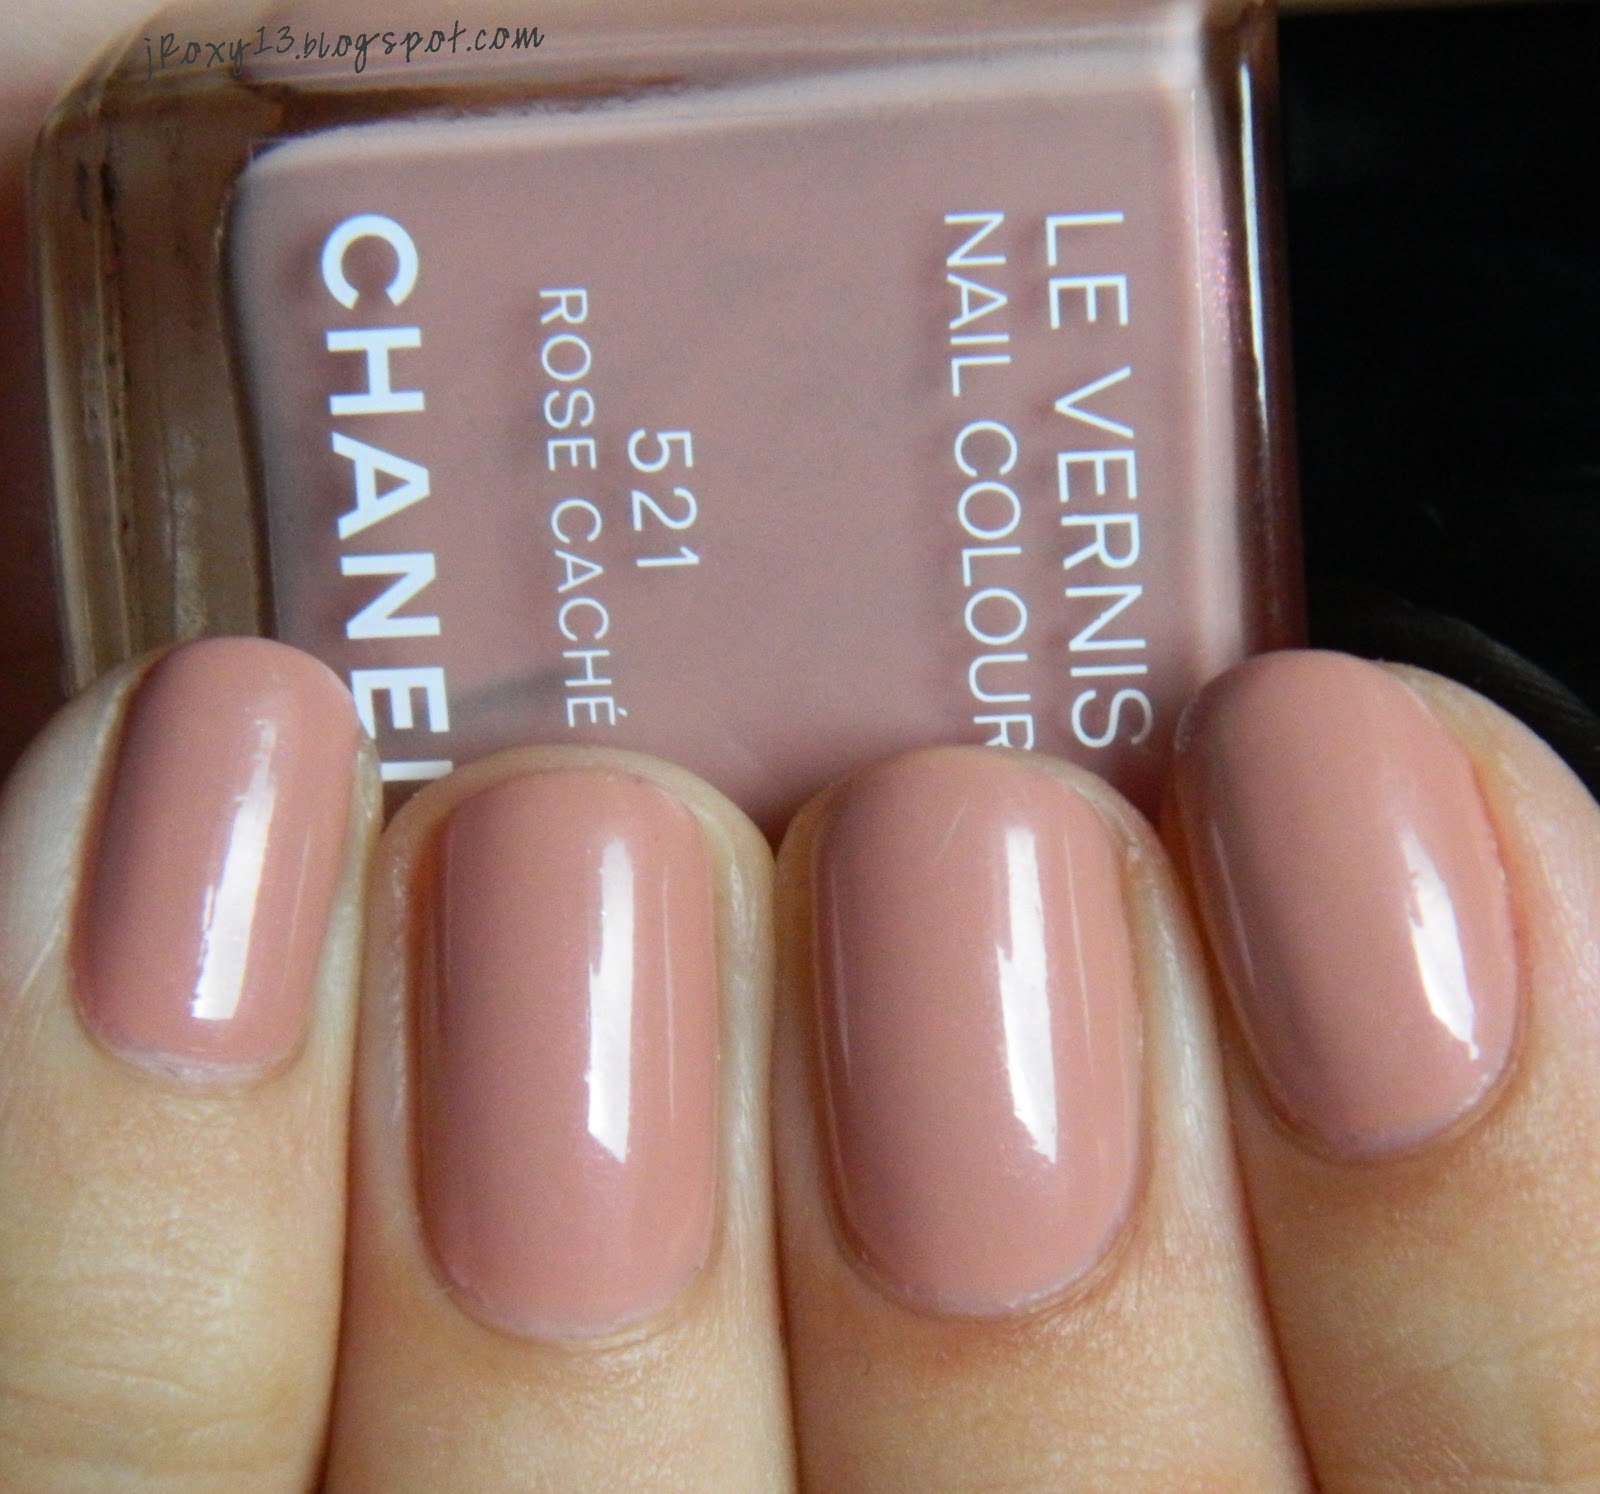 Chanel Rose Caché 521 Le Vernis - The Beauty Look Book